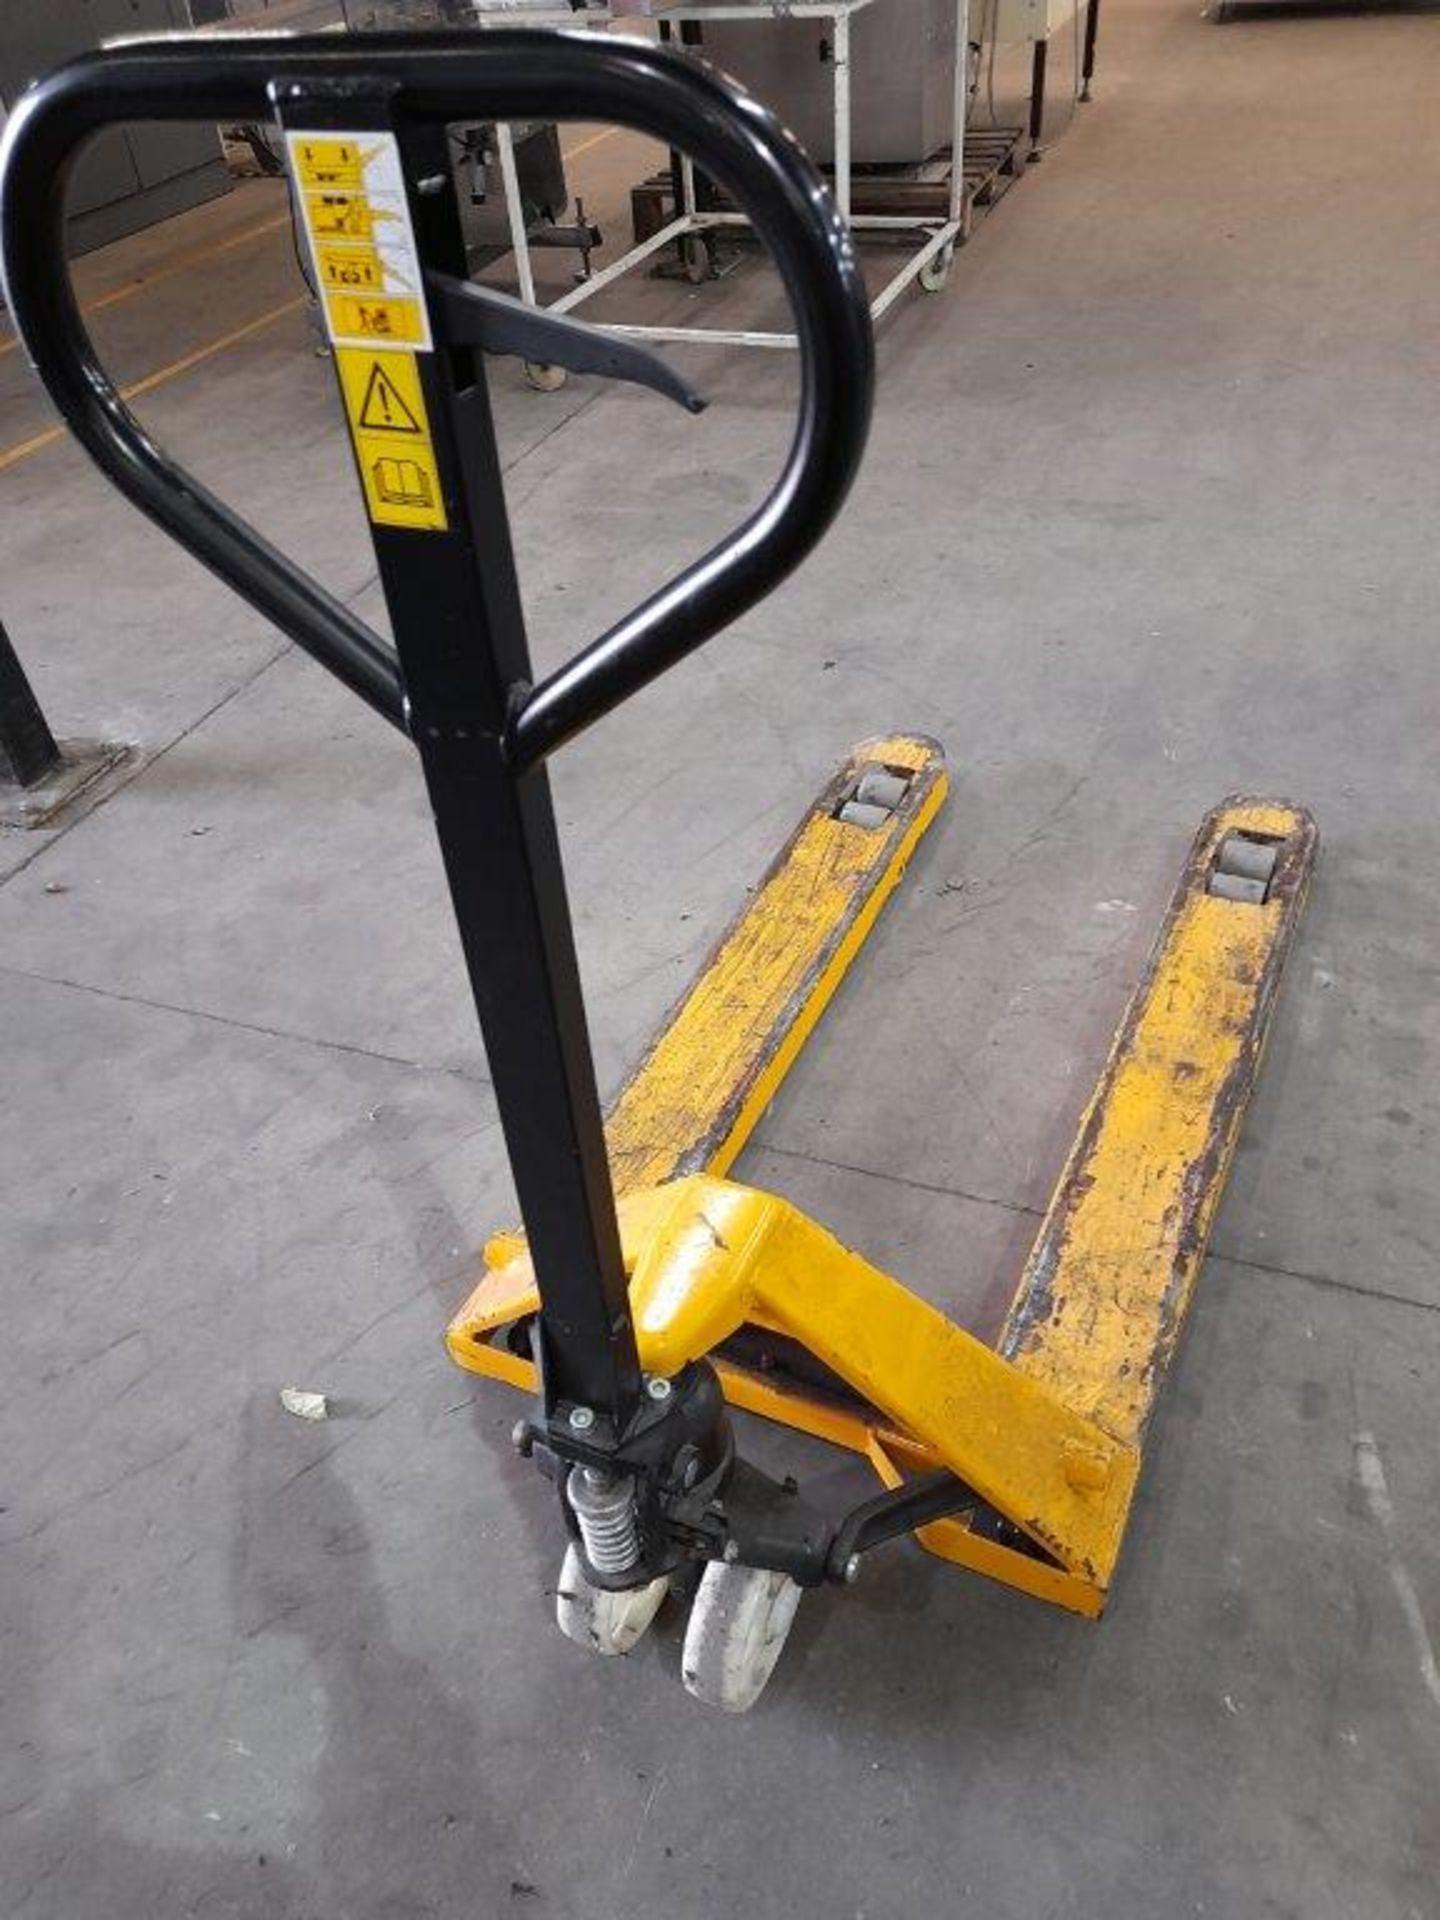 Pallet truck warehouse DF25 hydraulic pallet truck, serial no. 16072934/017 (2016), rated capacity - Image 2 of 3